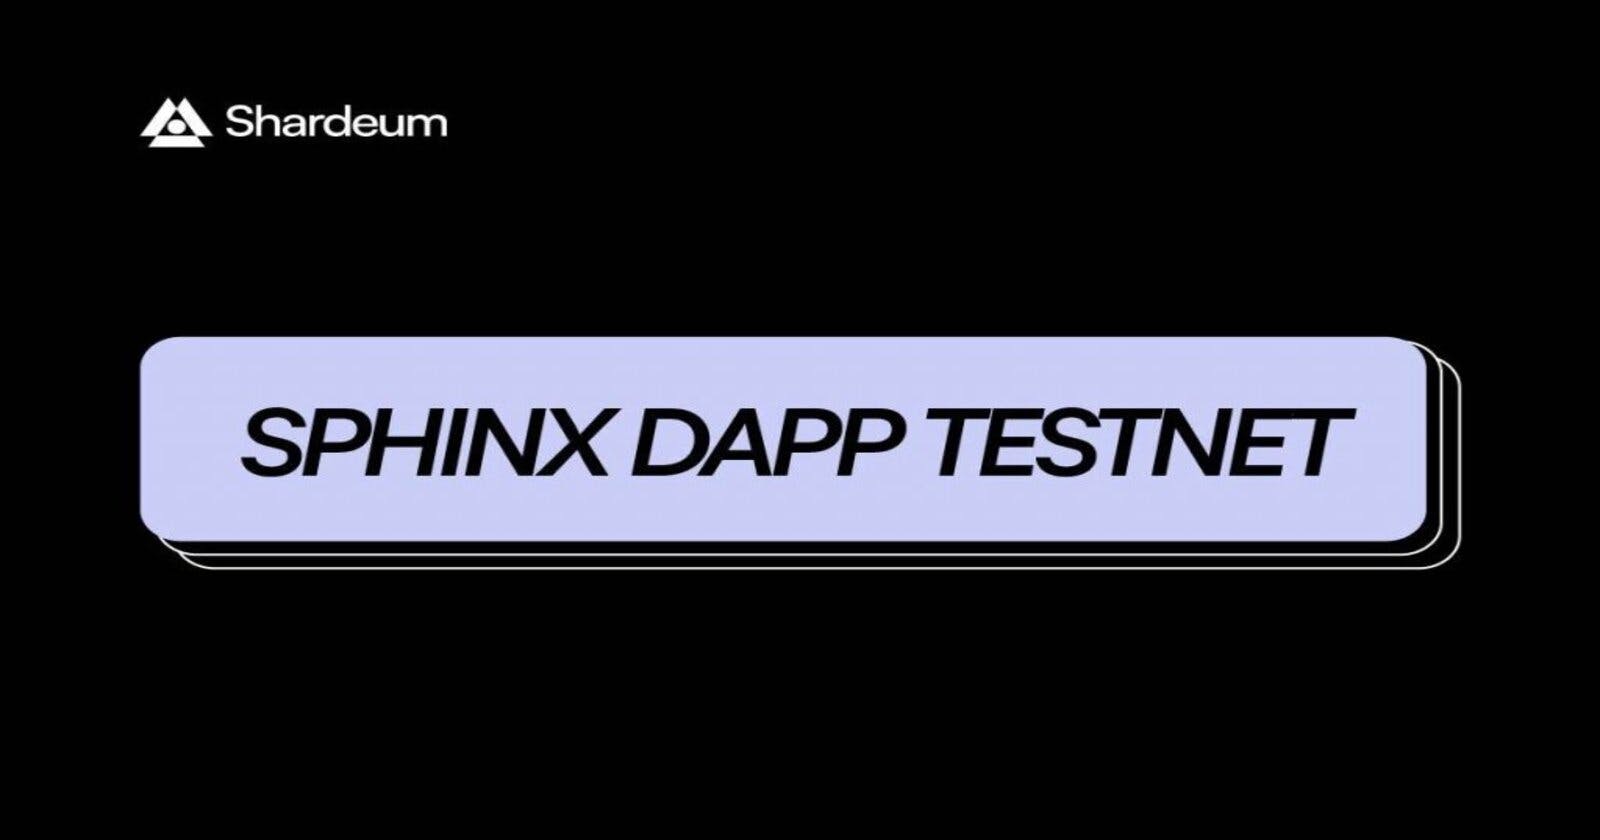 Sphinx Dapp: The Parallel Testnet That Empowers Developers and Users